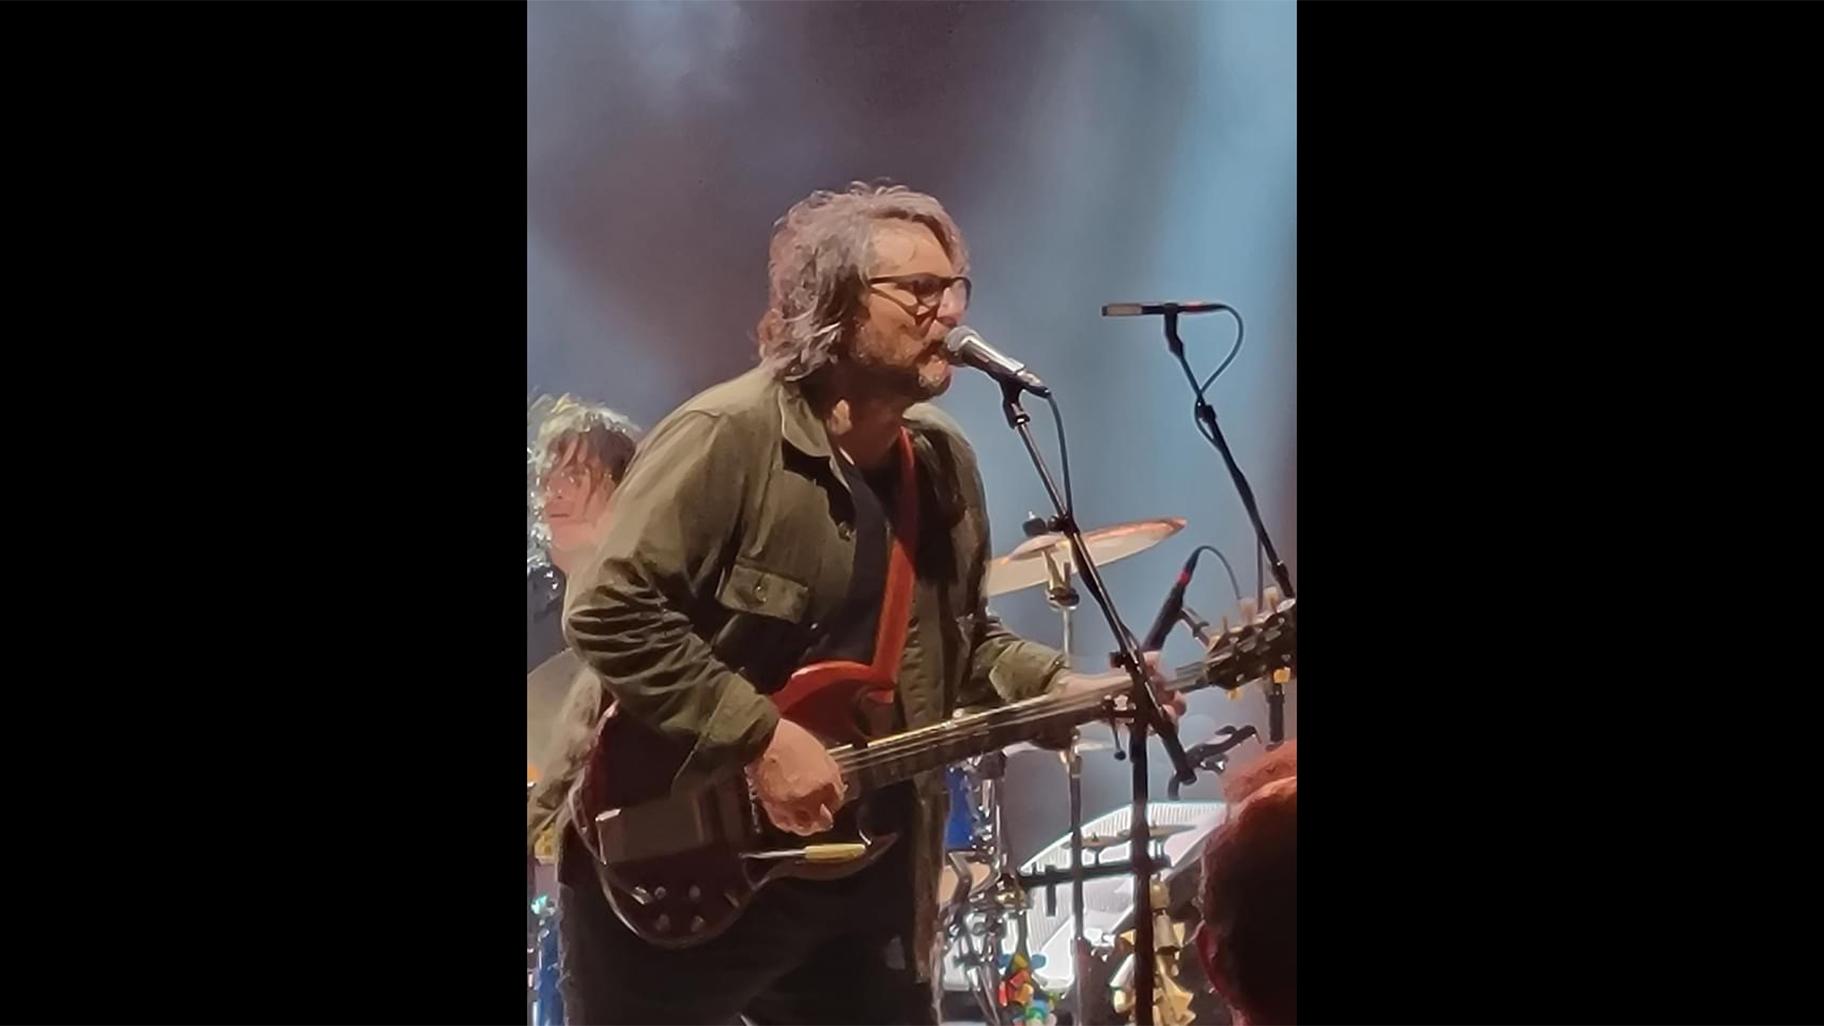 Jeff Tweedy performs with Wilco in Philadelphia, Aug. 21, 2021. (Courtesy of Chris Tracey)